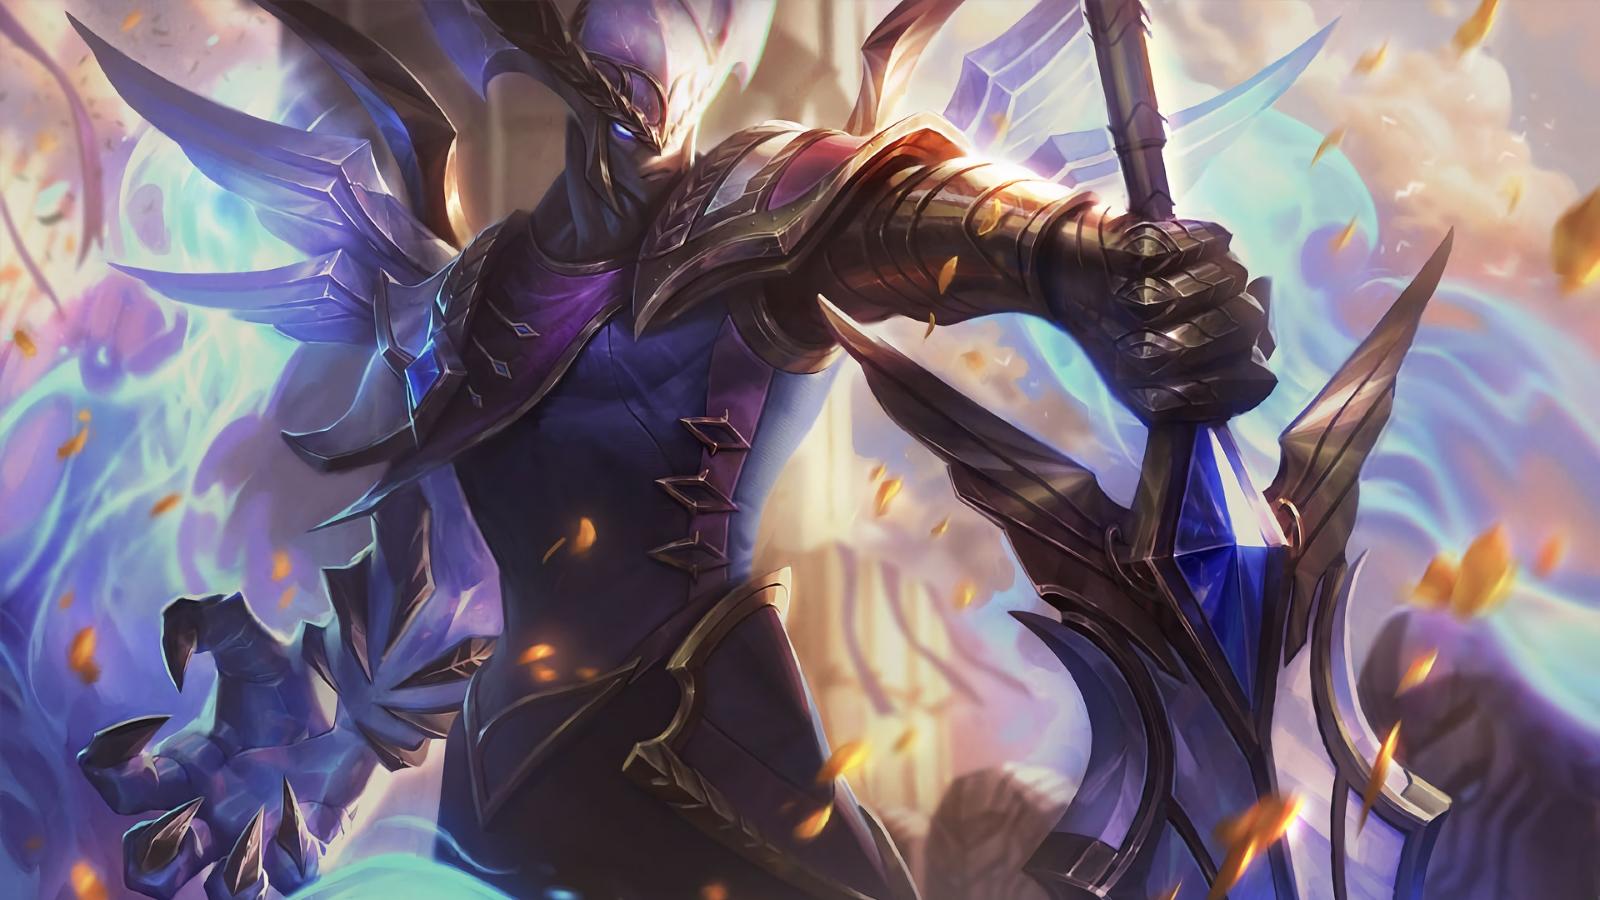 New League Of Legends Trailer Is So Bad Riot Had To Explain It